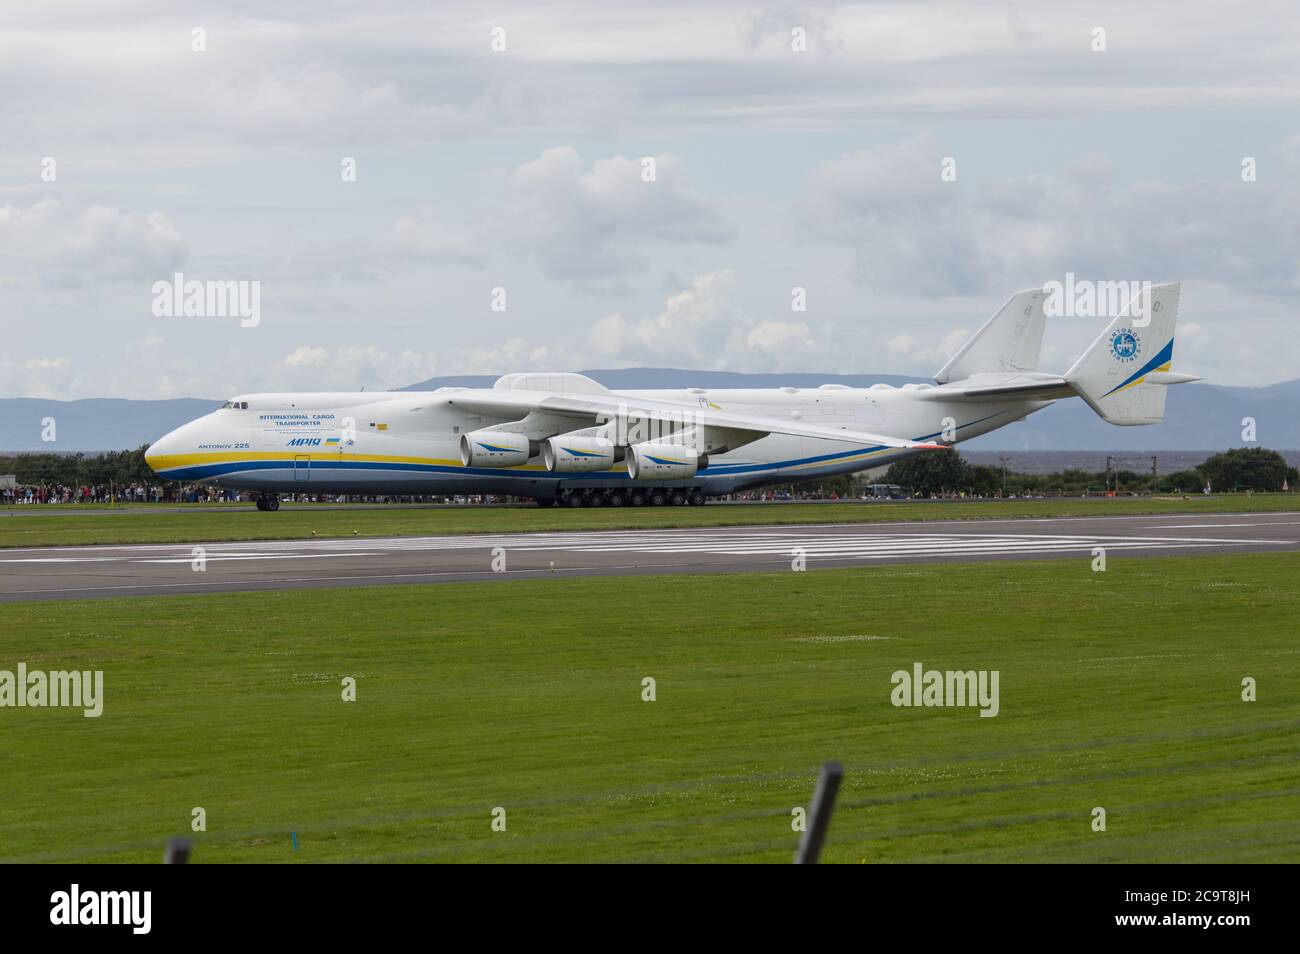 Prestwick, Scotland, UK. 2 August 2020 Pictured: Crowds of aviation enthusiasts and plane spotters turned out to see the Antonov An-225 Mryia (Reg UR-82060) make a scheduled arrival for a refeulling stop at Glasgow Prestwick Airport from Bangor, USA before departing at 4.30pm for Châteauroux-Centre Airport in France. The giant strategic airlift cargo plane behemoth is powered by six massive Six Ivchenko Progress Lotarev D-18T three shaft turbofan engines, has a maximum takeoff weight of 640 tonnes. Credit: Colin Fisher/Alamy Live News Stock Photo